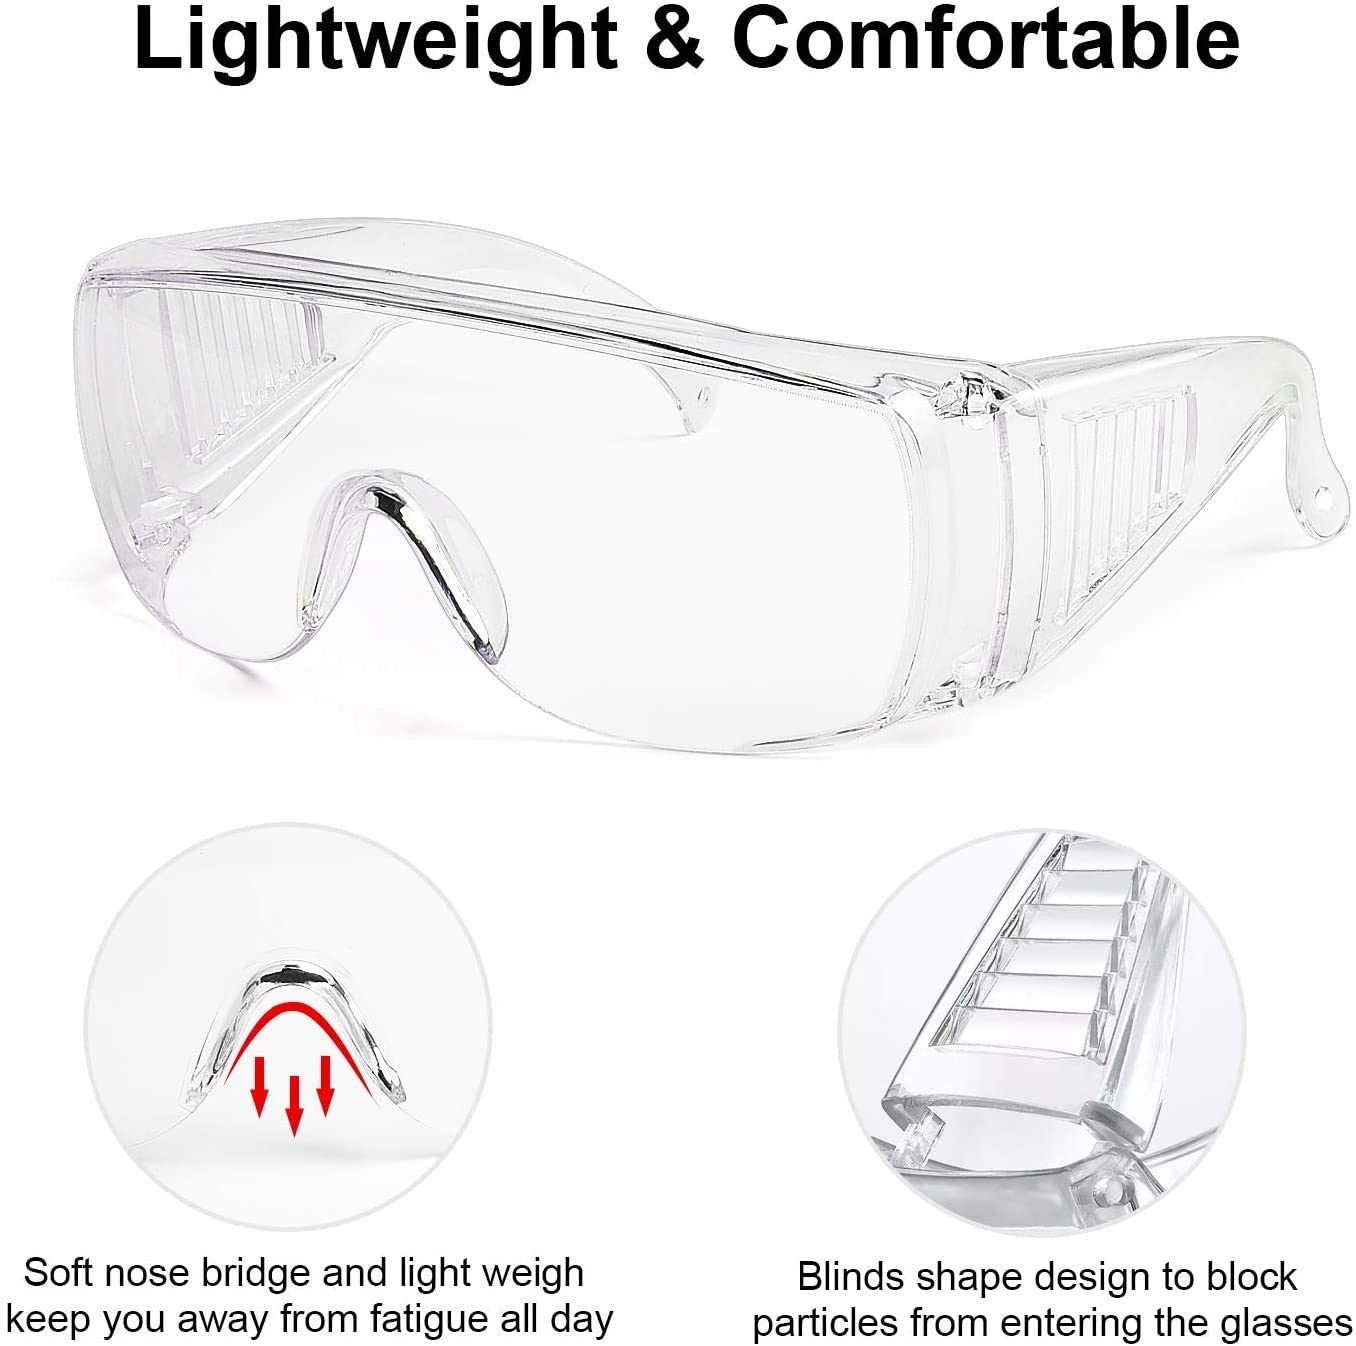 Alrisco Protective Eyewear Safety Goggles Clear Anti-fog Anti-Scratch Safety Glasses over Prescription Glasses, Transparent Frame Light Weight and Comfortable - image 2 of 7